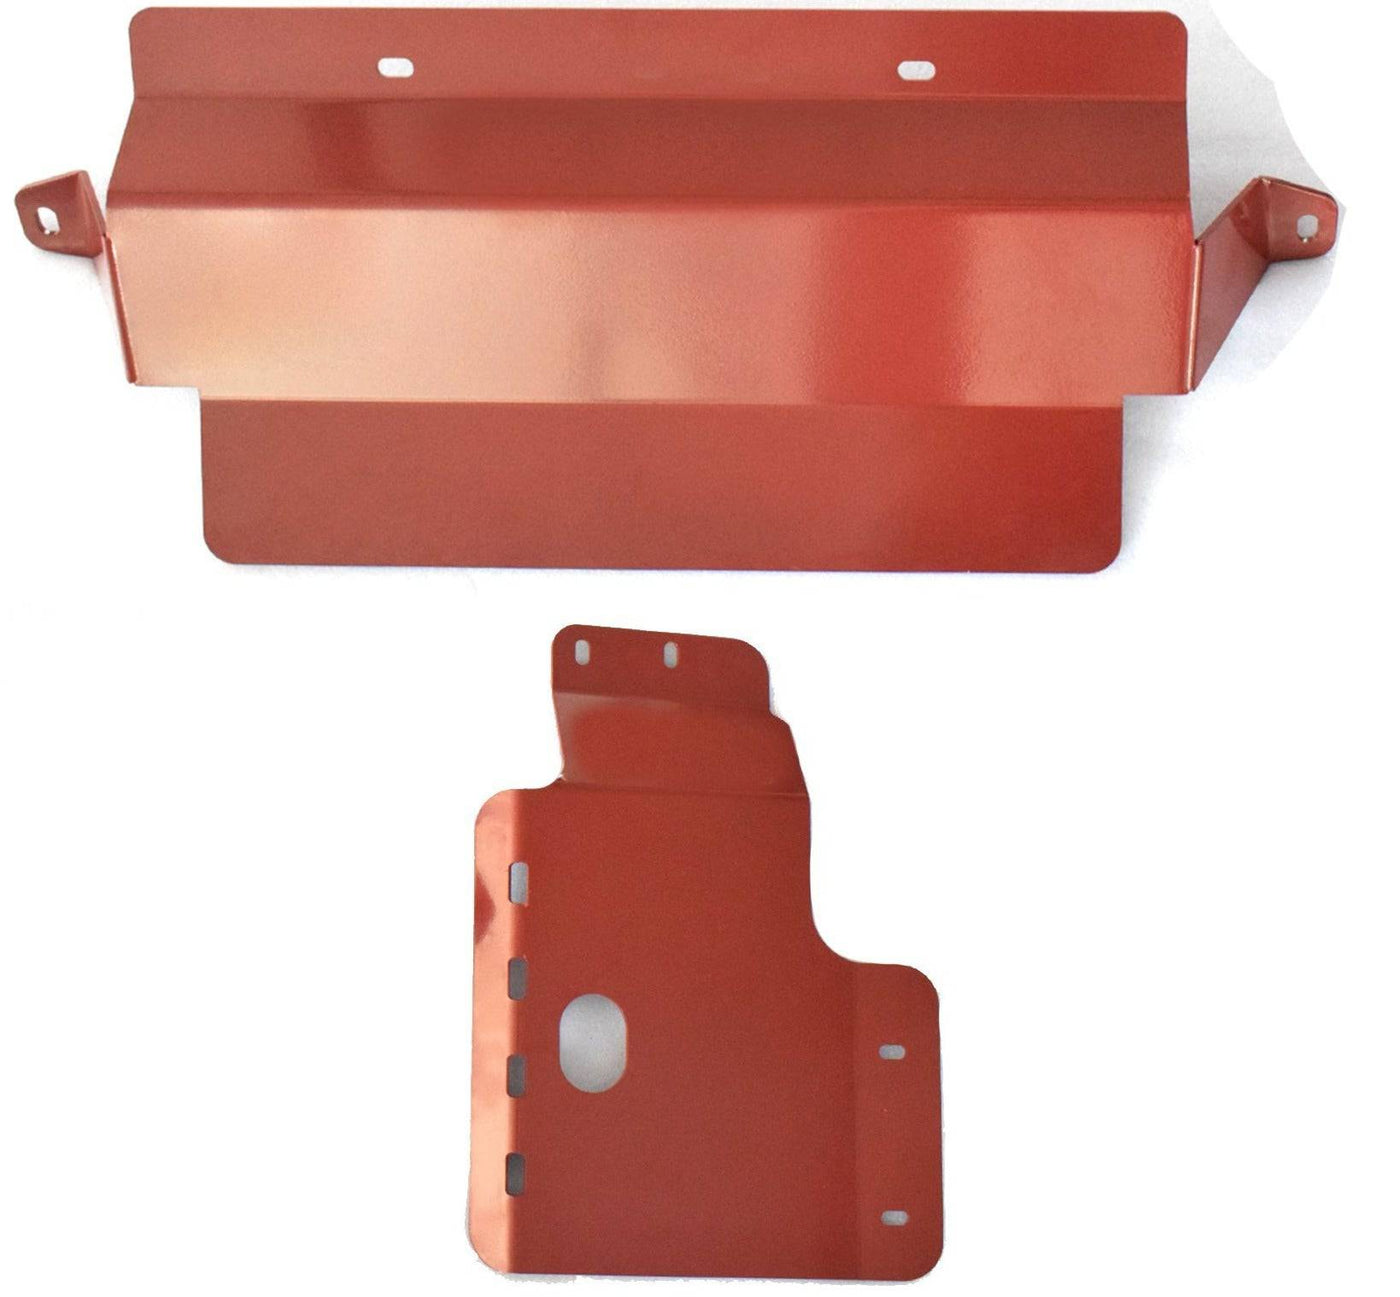 Red Bash Plate Suitable for Toyota Land Cruiser 79,78,76 Series 4mm 2 pcs Red - OZI4X4 PTY LTD